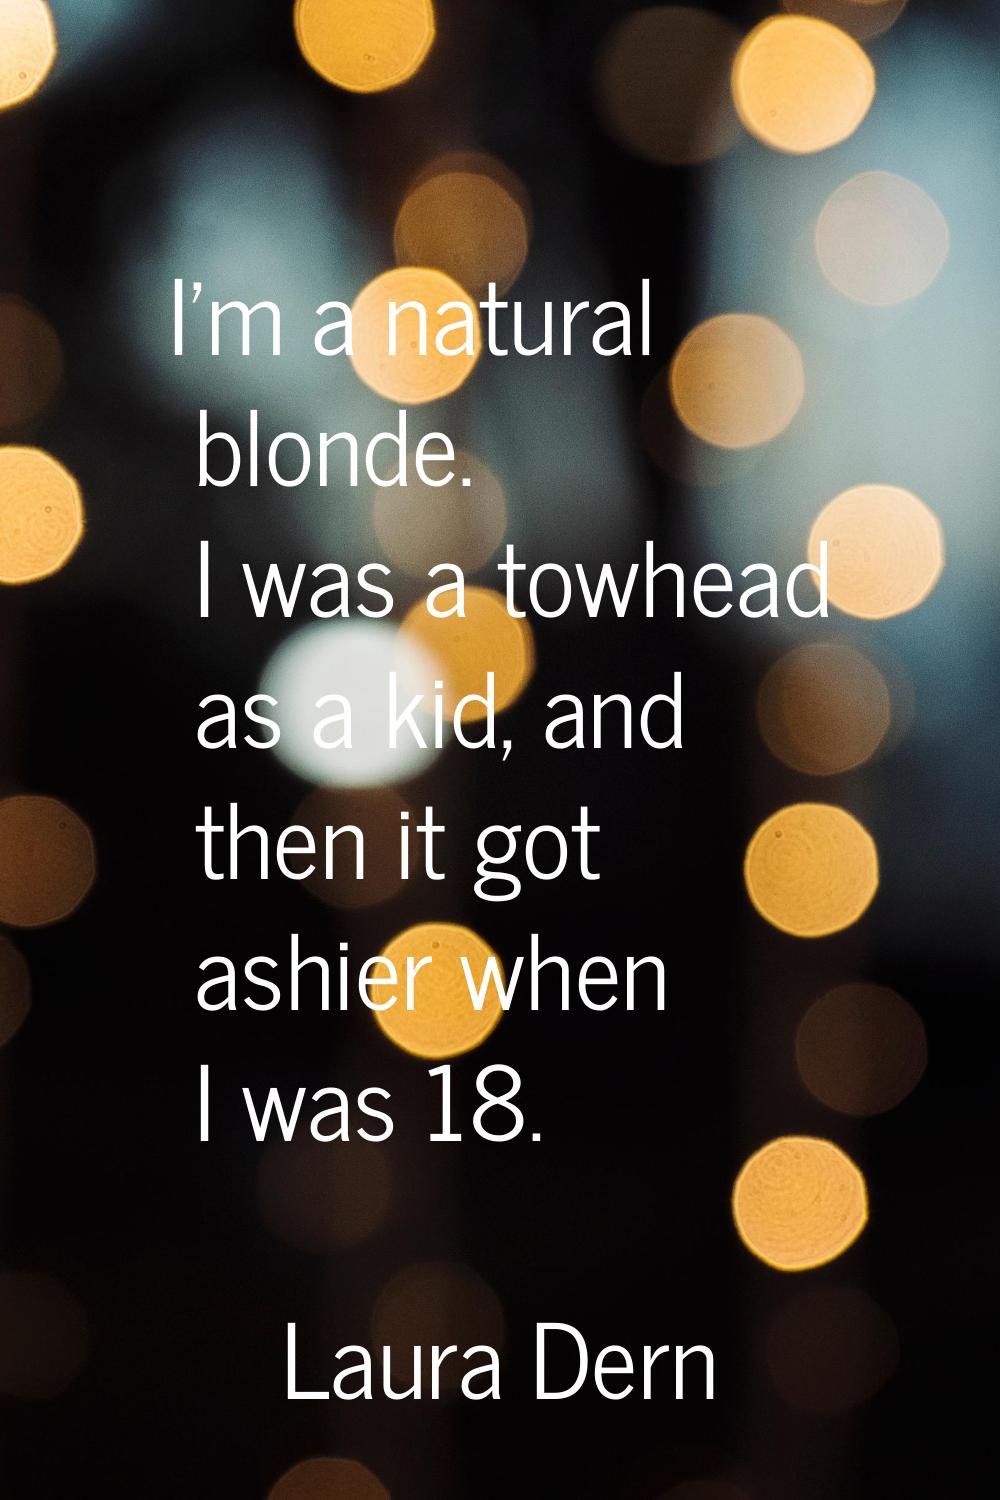 I'm a natural blonde. I was a towhead as a kid, and then it got ashier when I was 18.